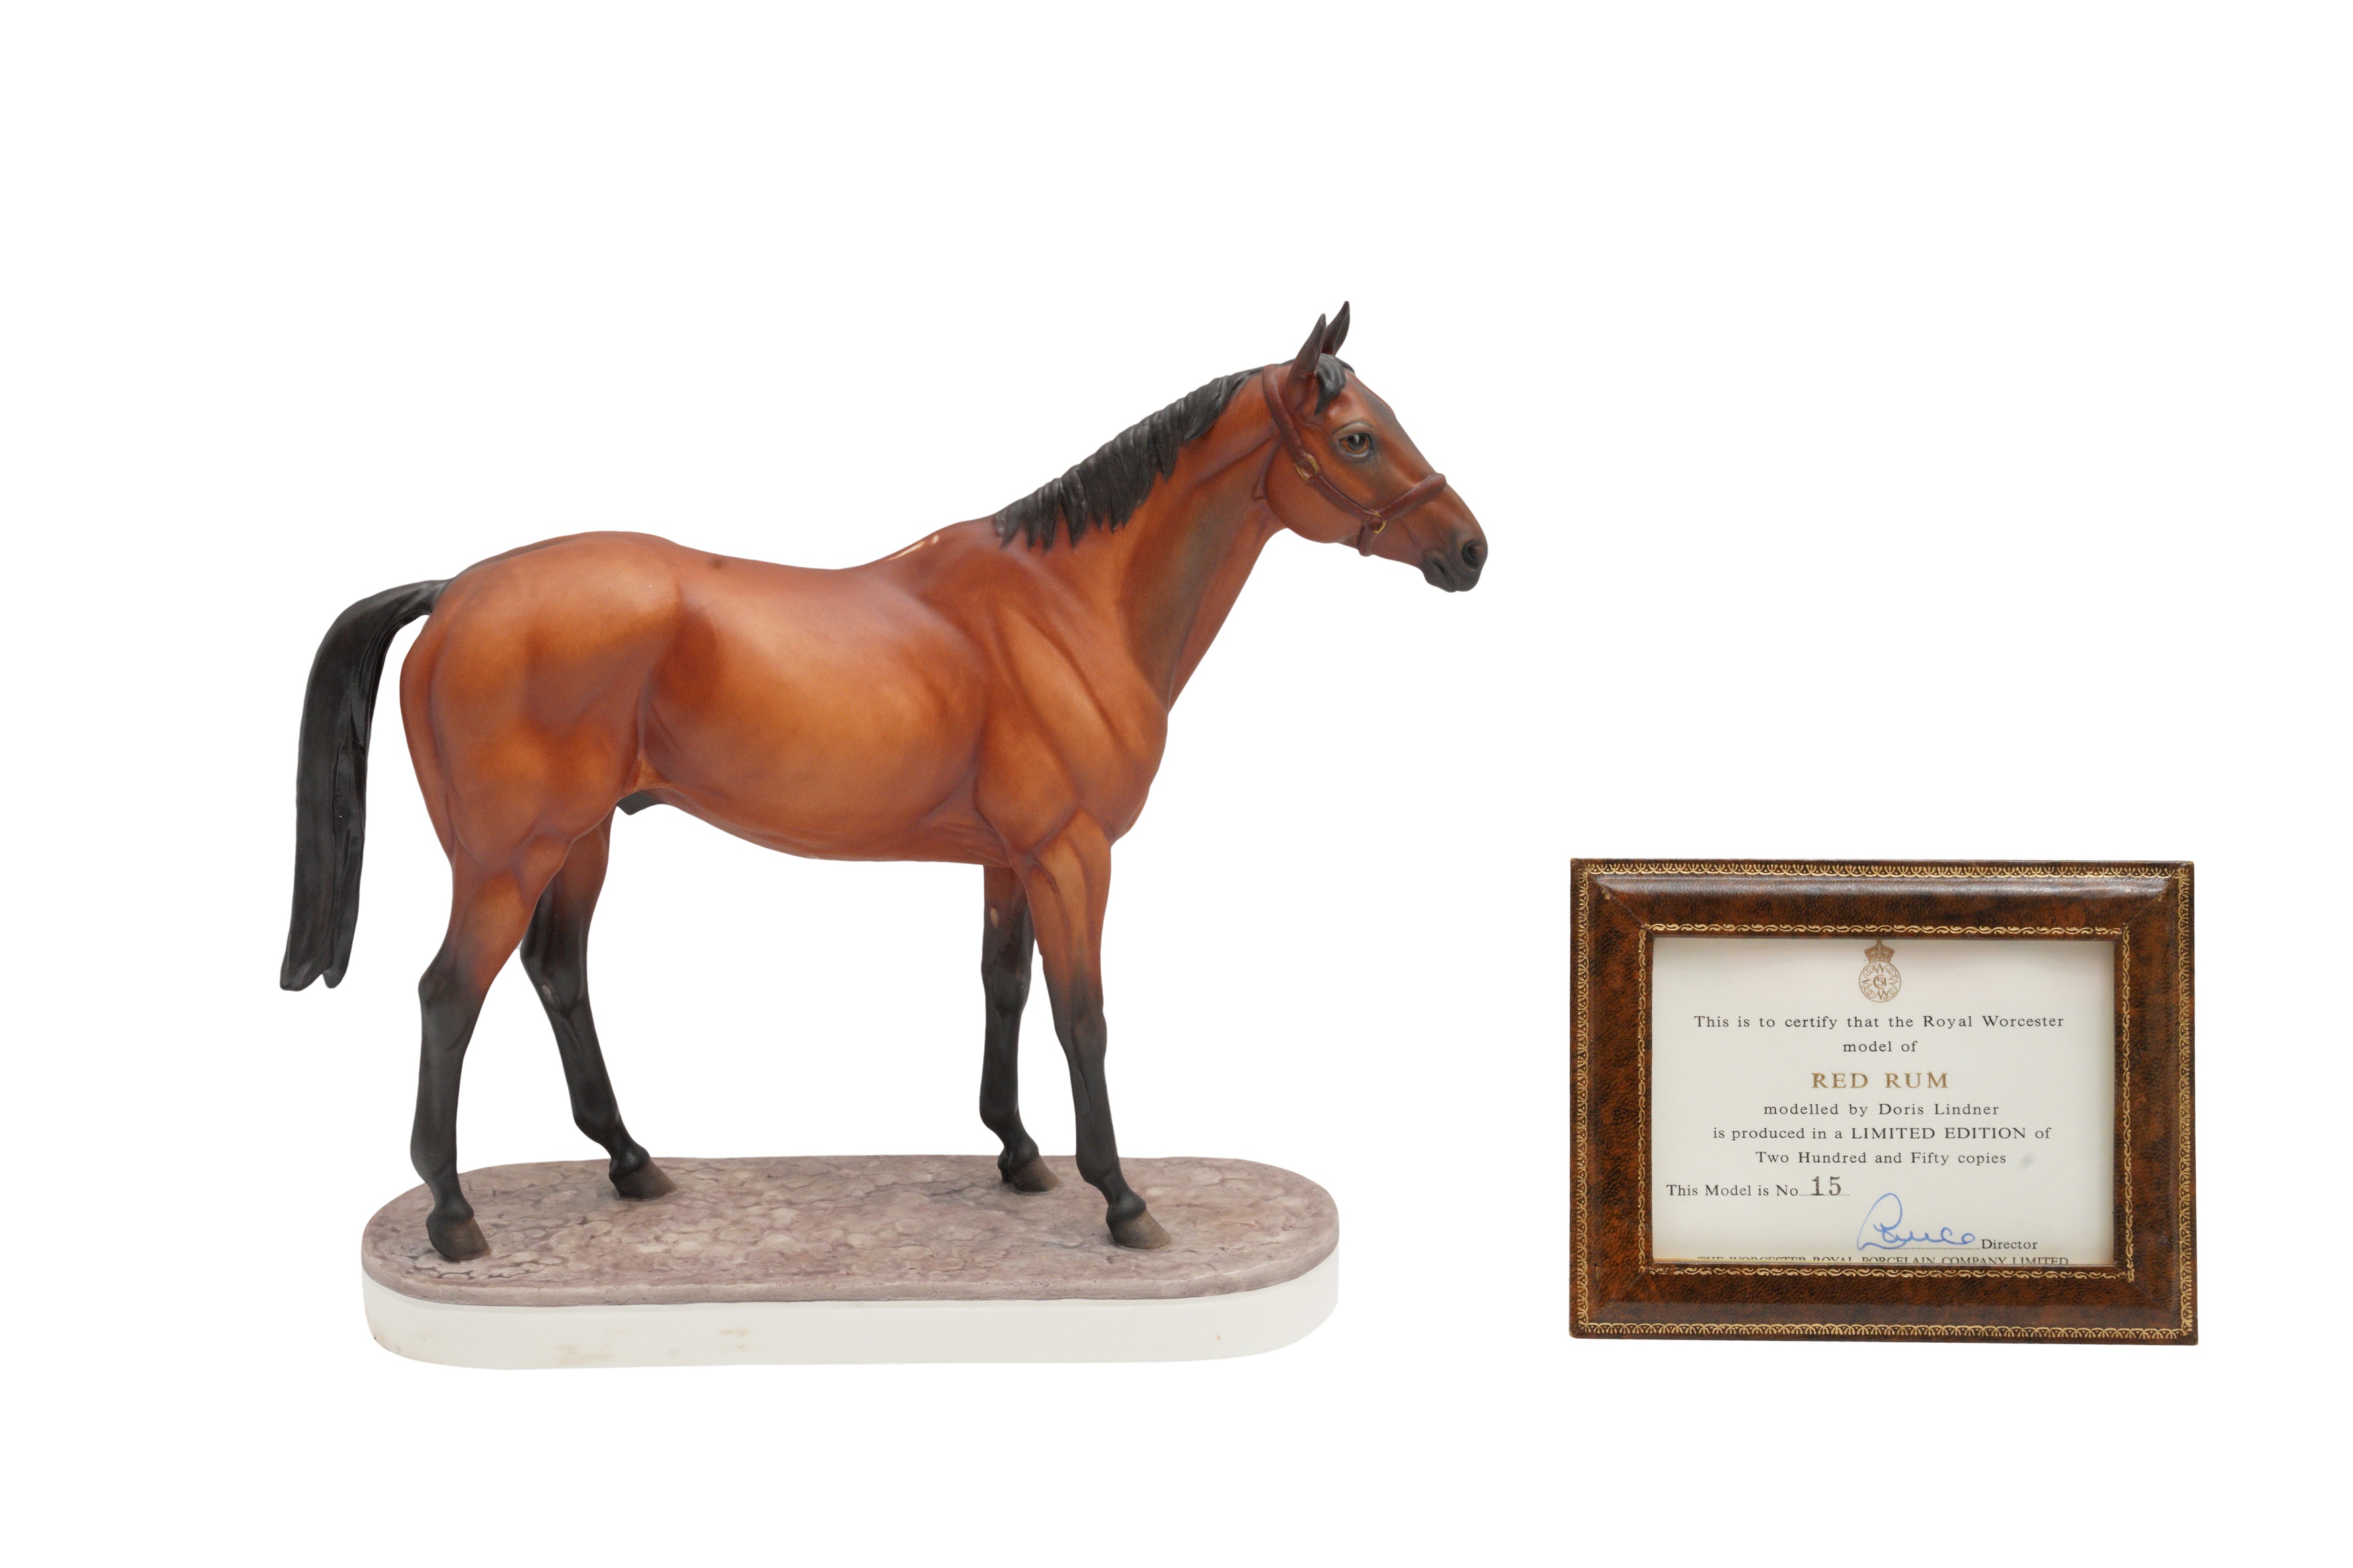 A LIMITED EDITION ROYAL WORCESTER FIGURE OF RED RUM